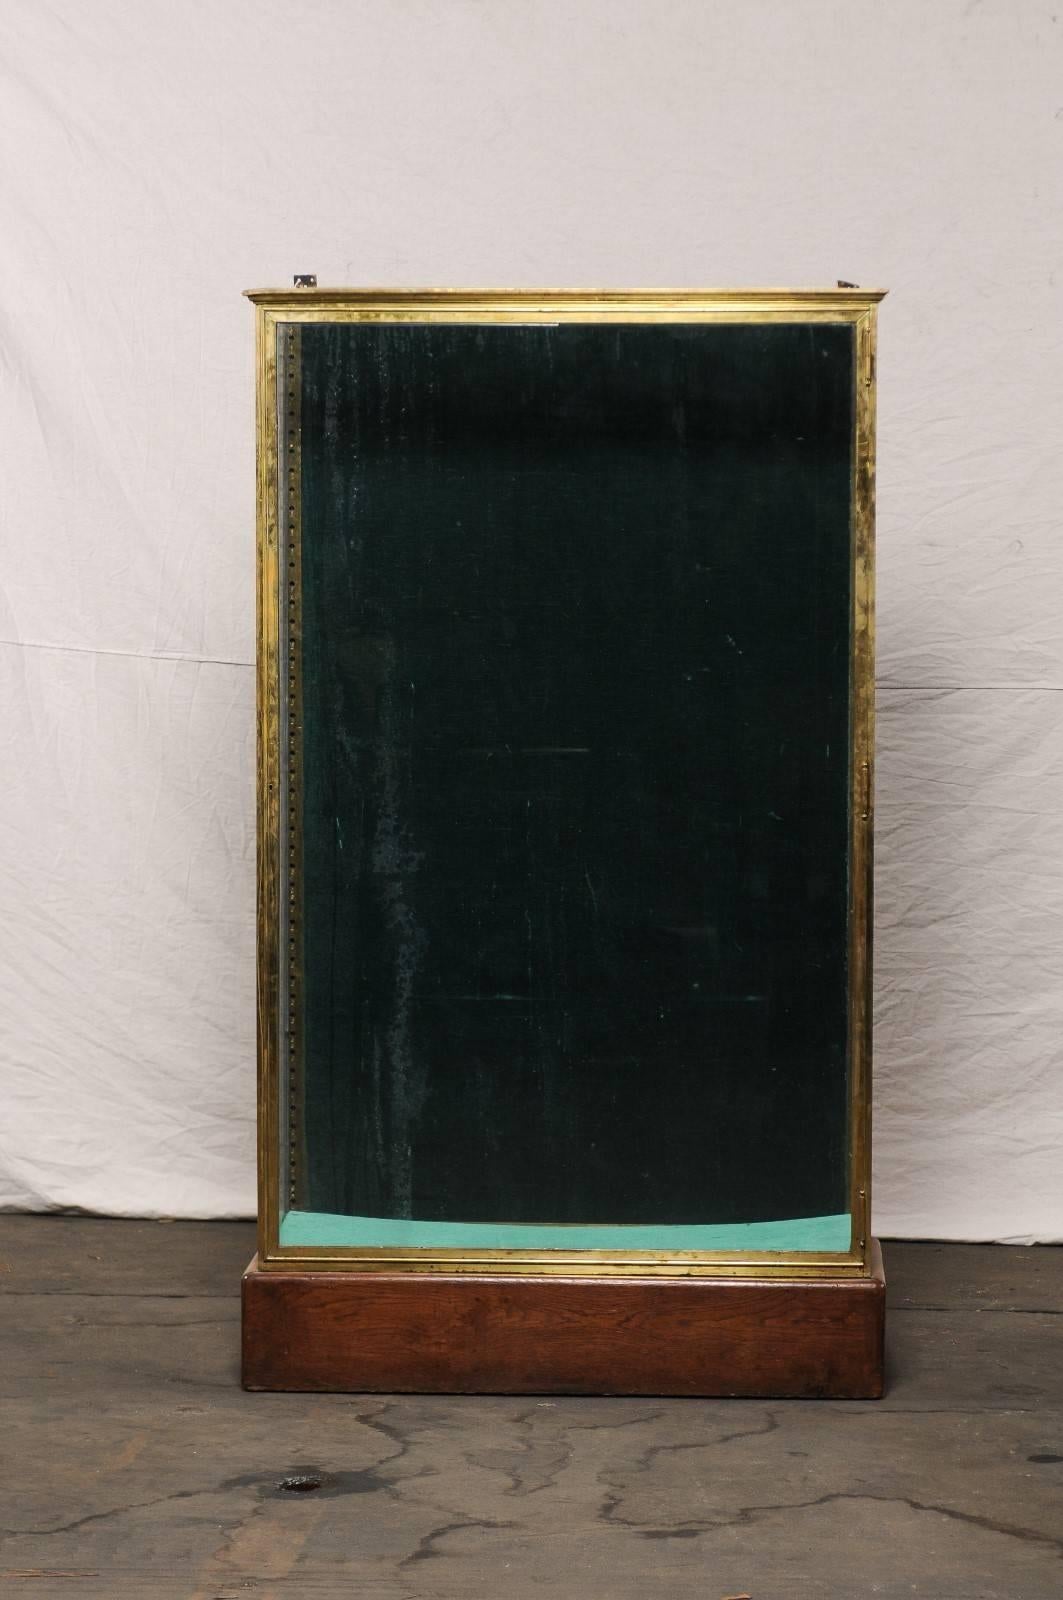 Early 20th century large bronze and glass vitrine cabinet.